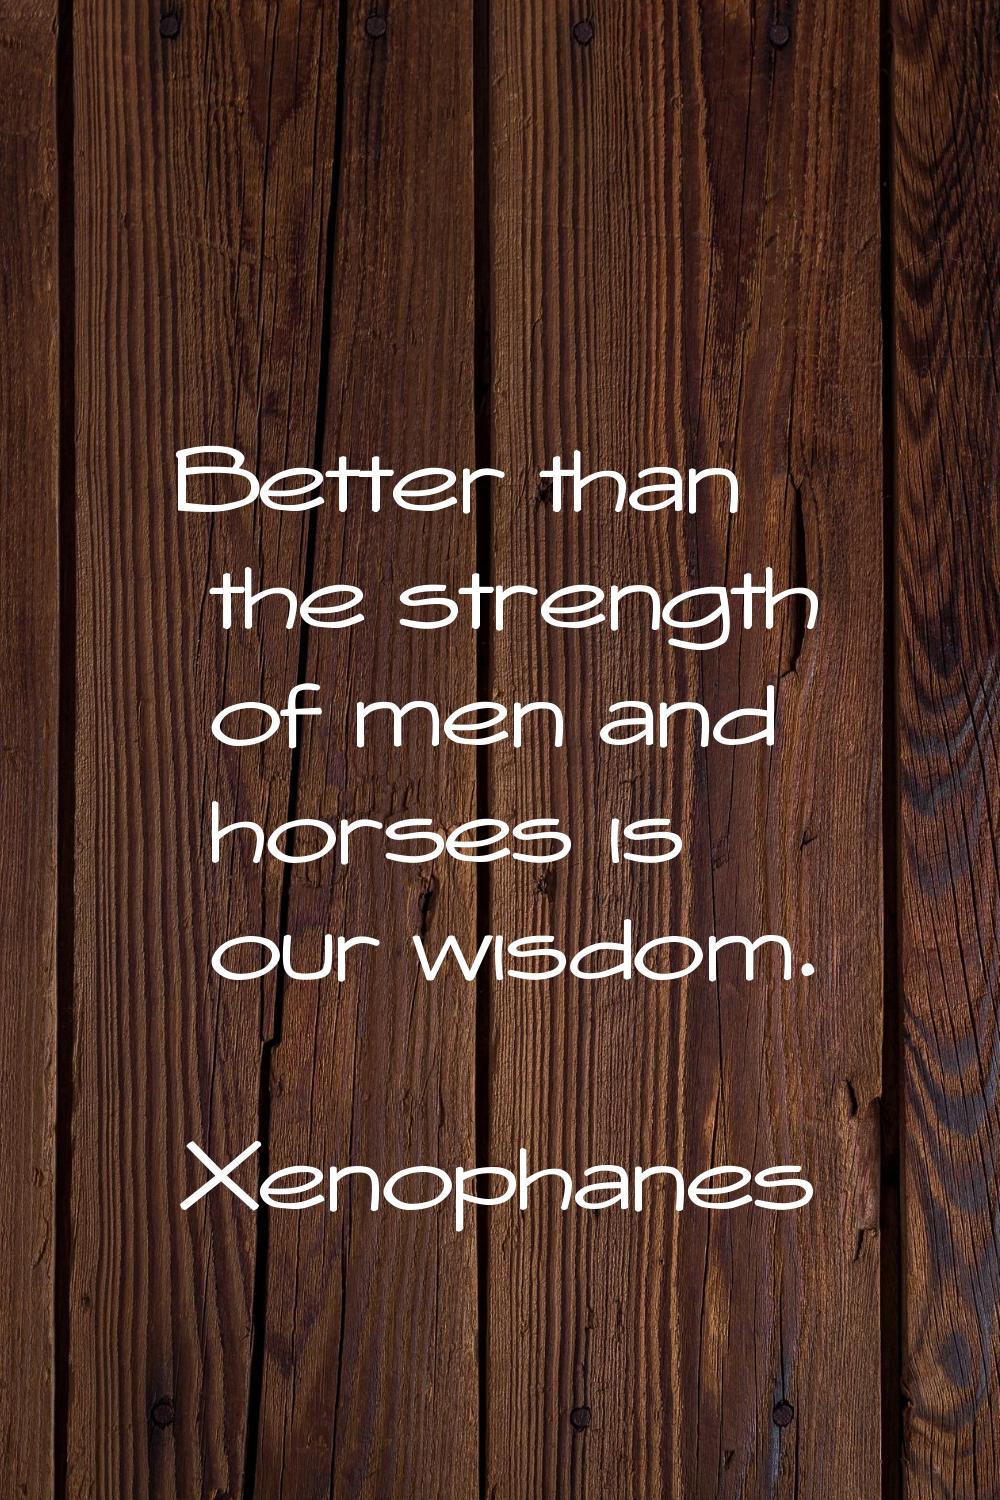 Better than the strength of men and horses is our wisdom.